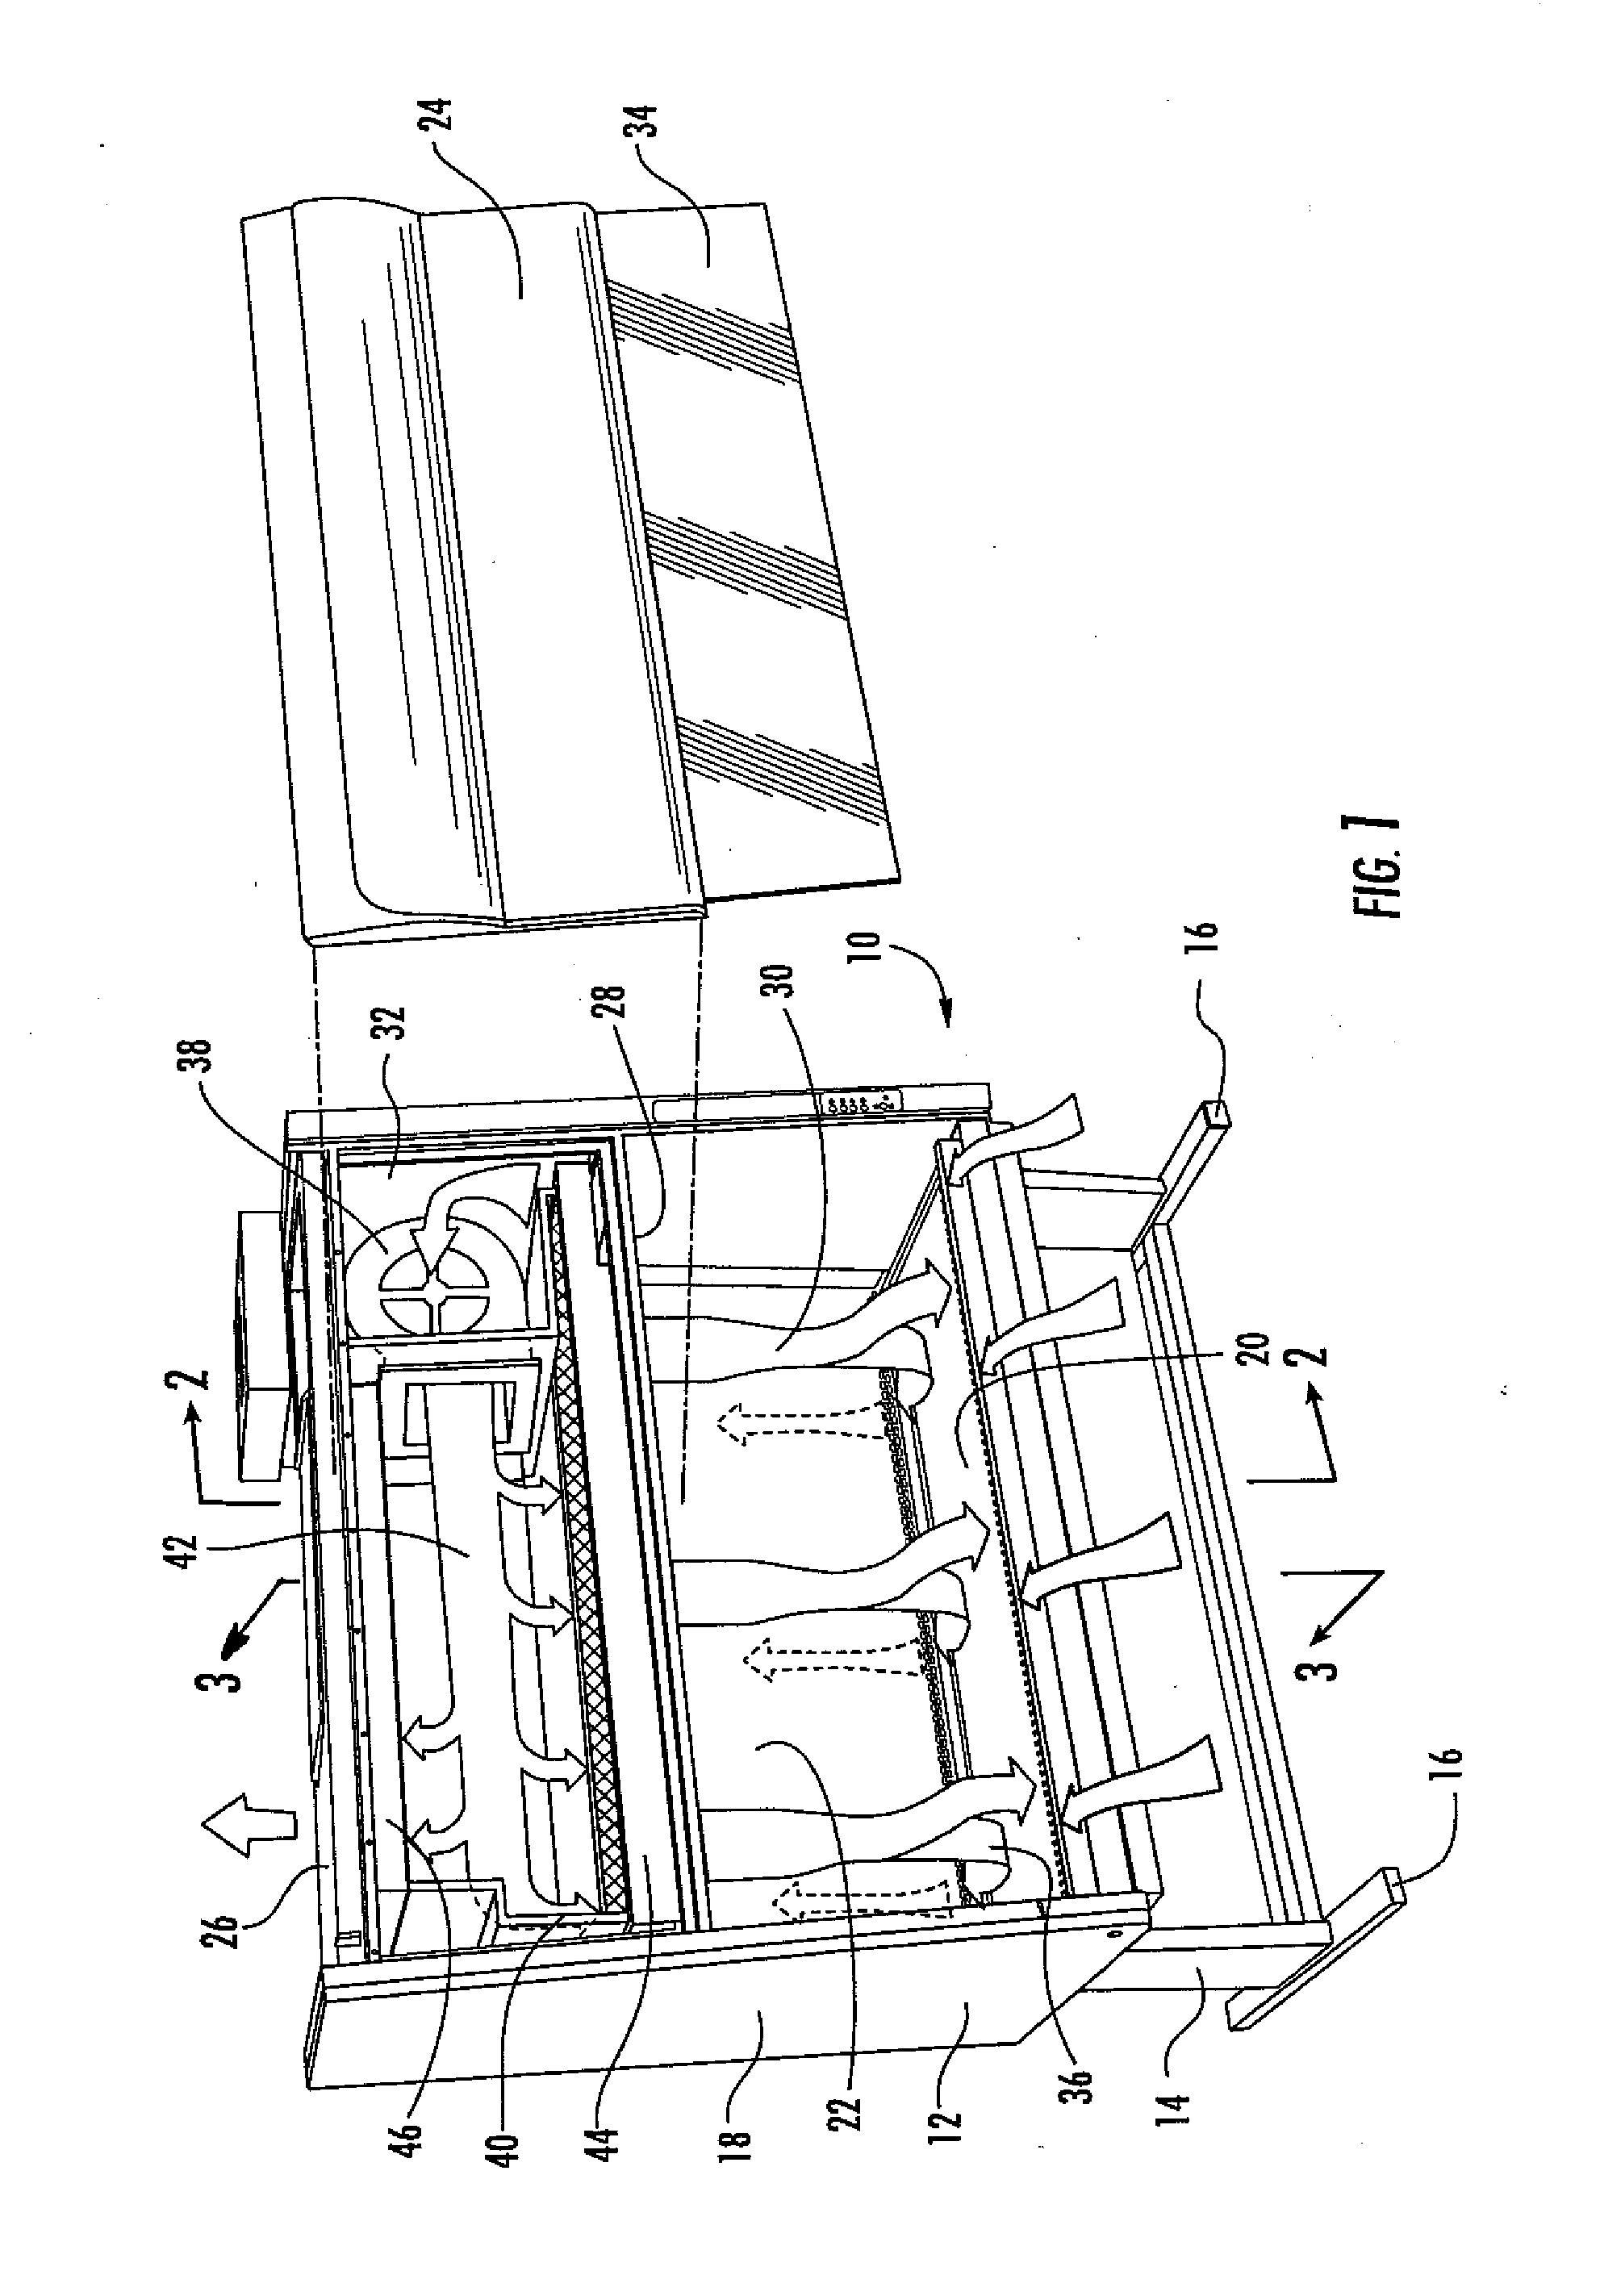 Apparatus and method for controlling and directing flow of contaminated air to filters and for monitoring filter loading in a biological safety cabinet